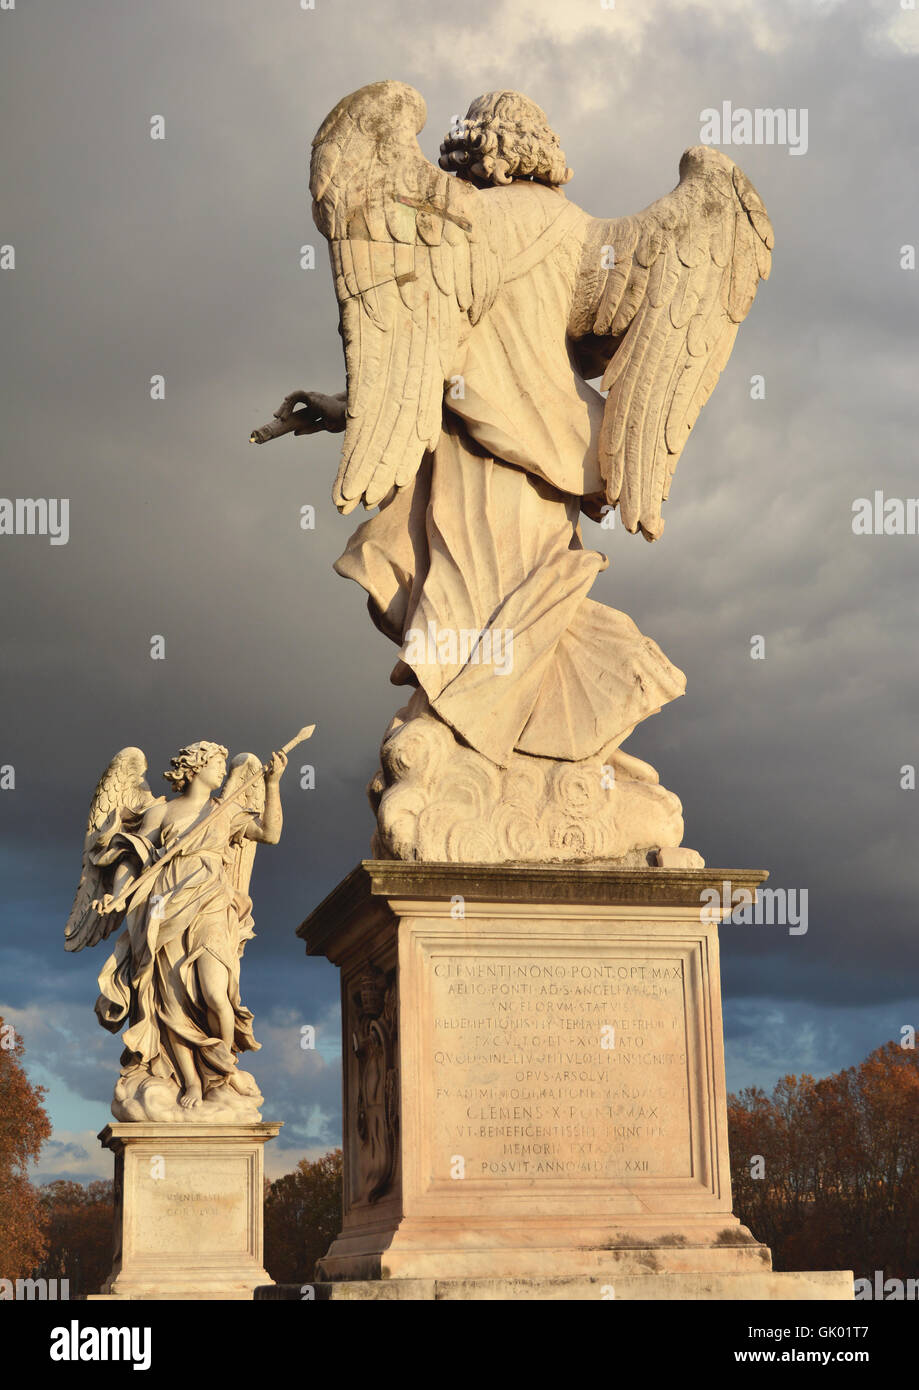 Beautiful statues of angels in Rome against autumn cloudy sky at sunset Stock Photo